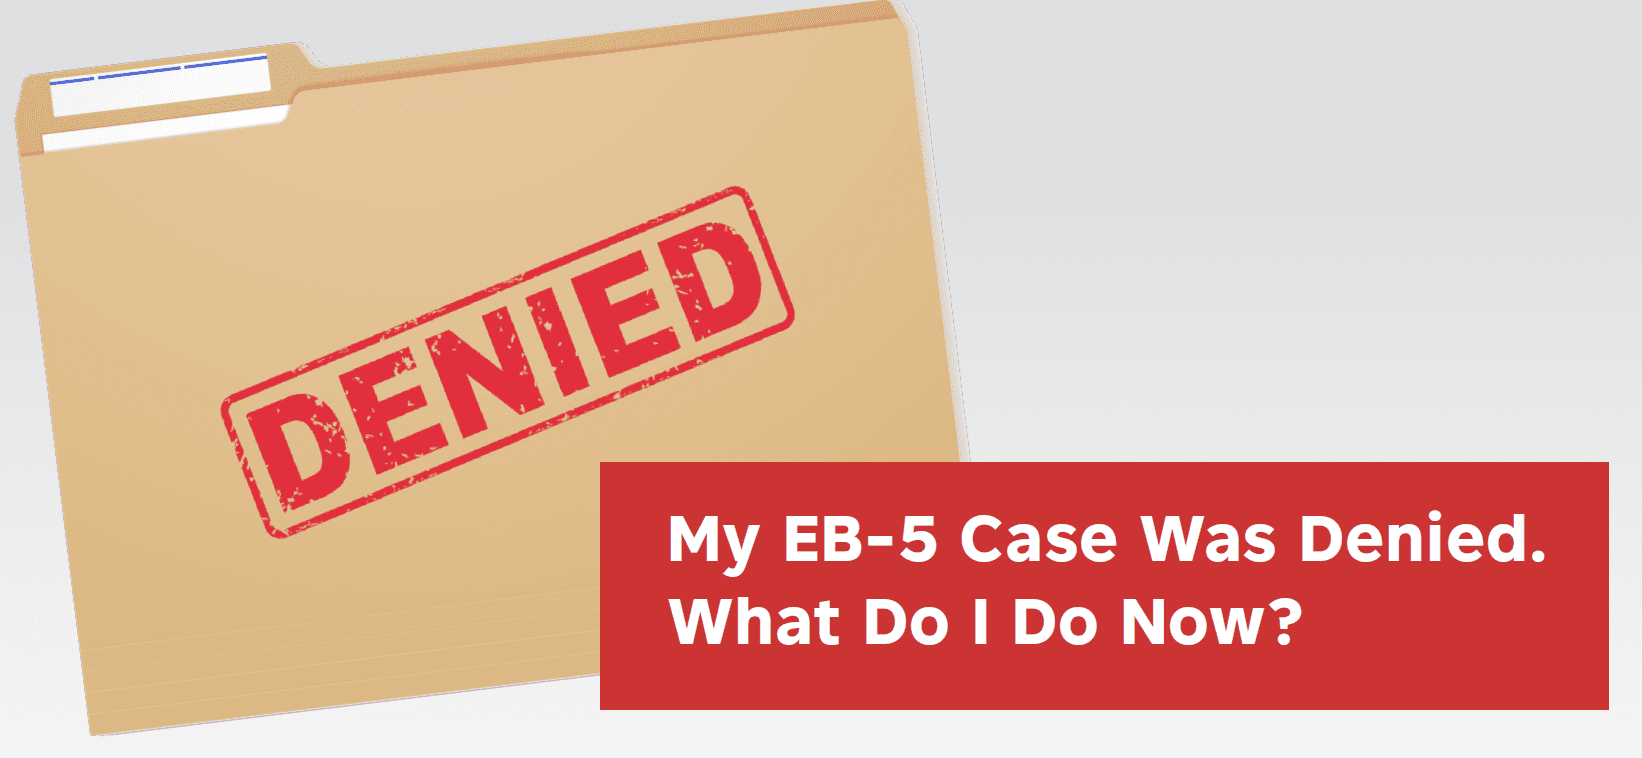 RCBJ Perspectives:  “My EB-5 Case Was Denied. What Do I Do Now?”